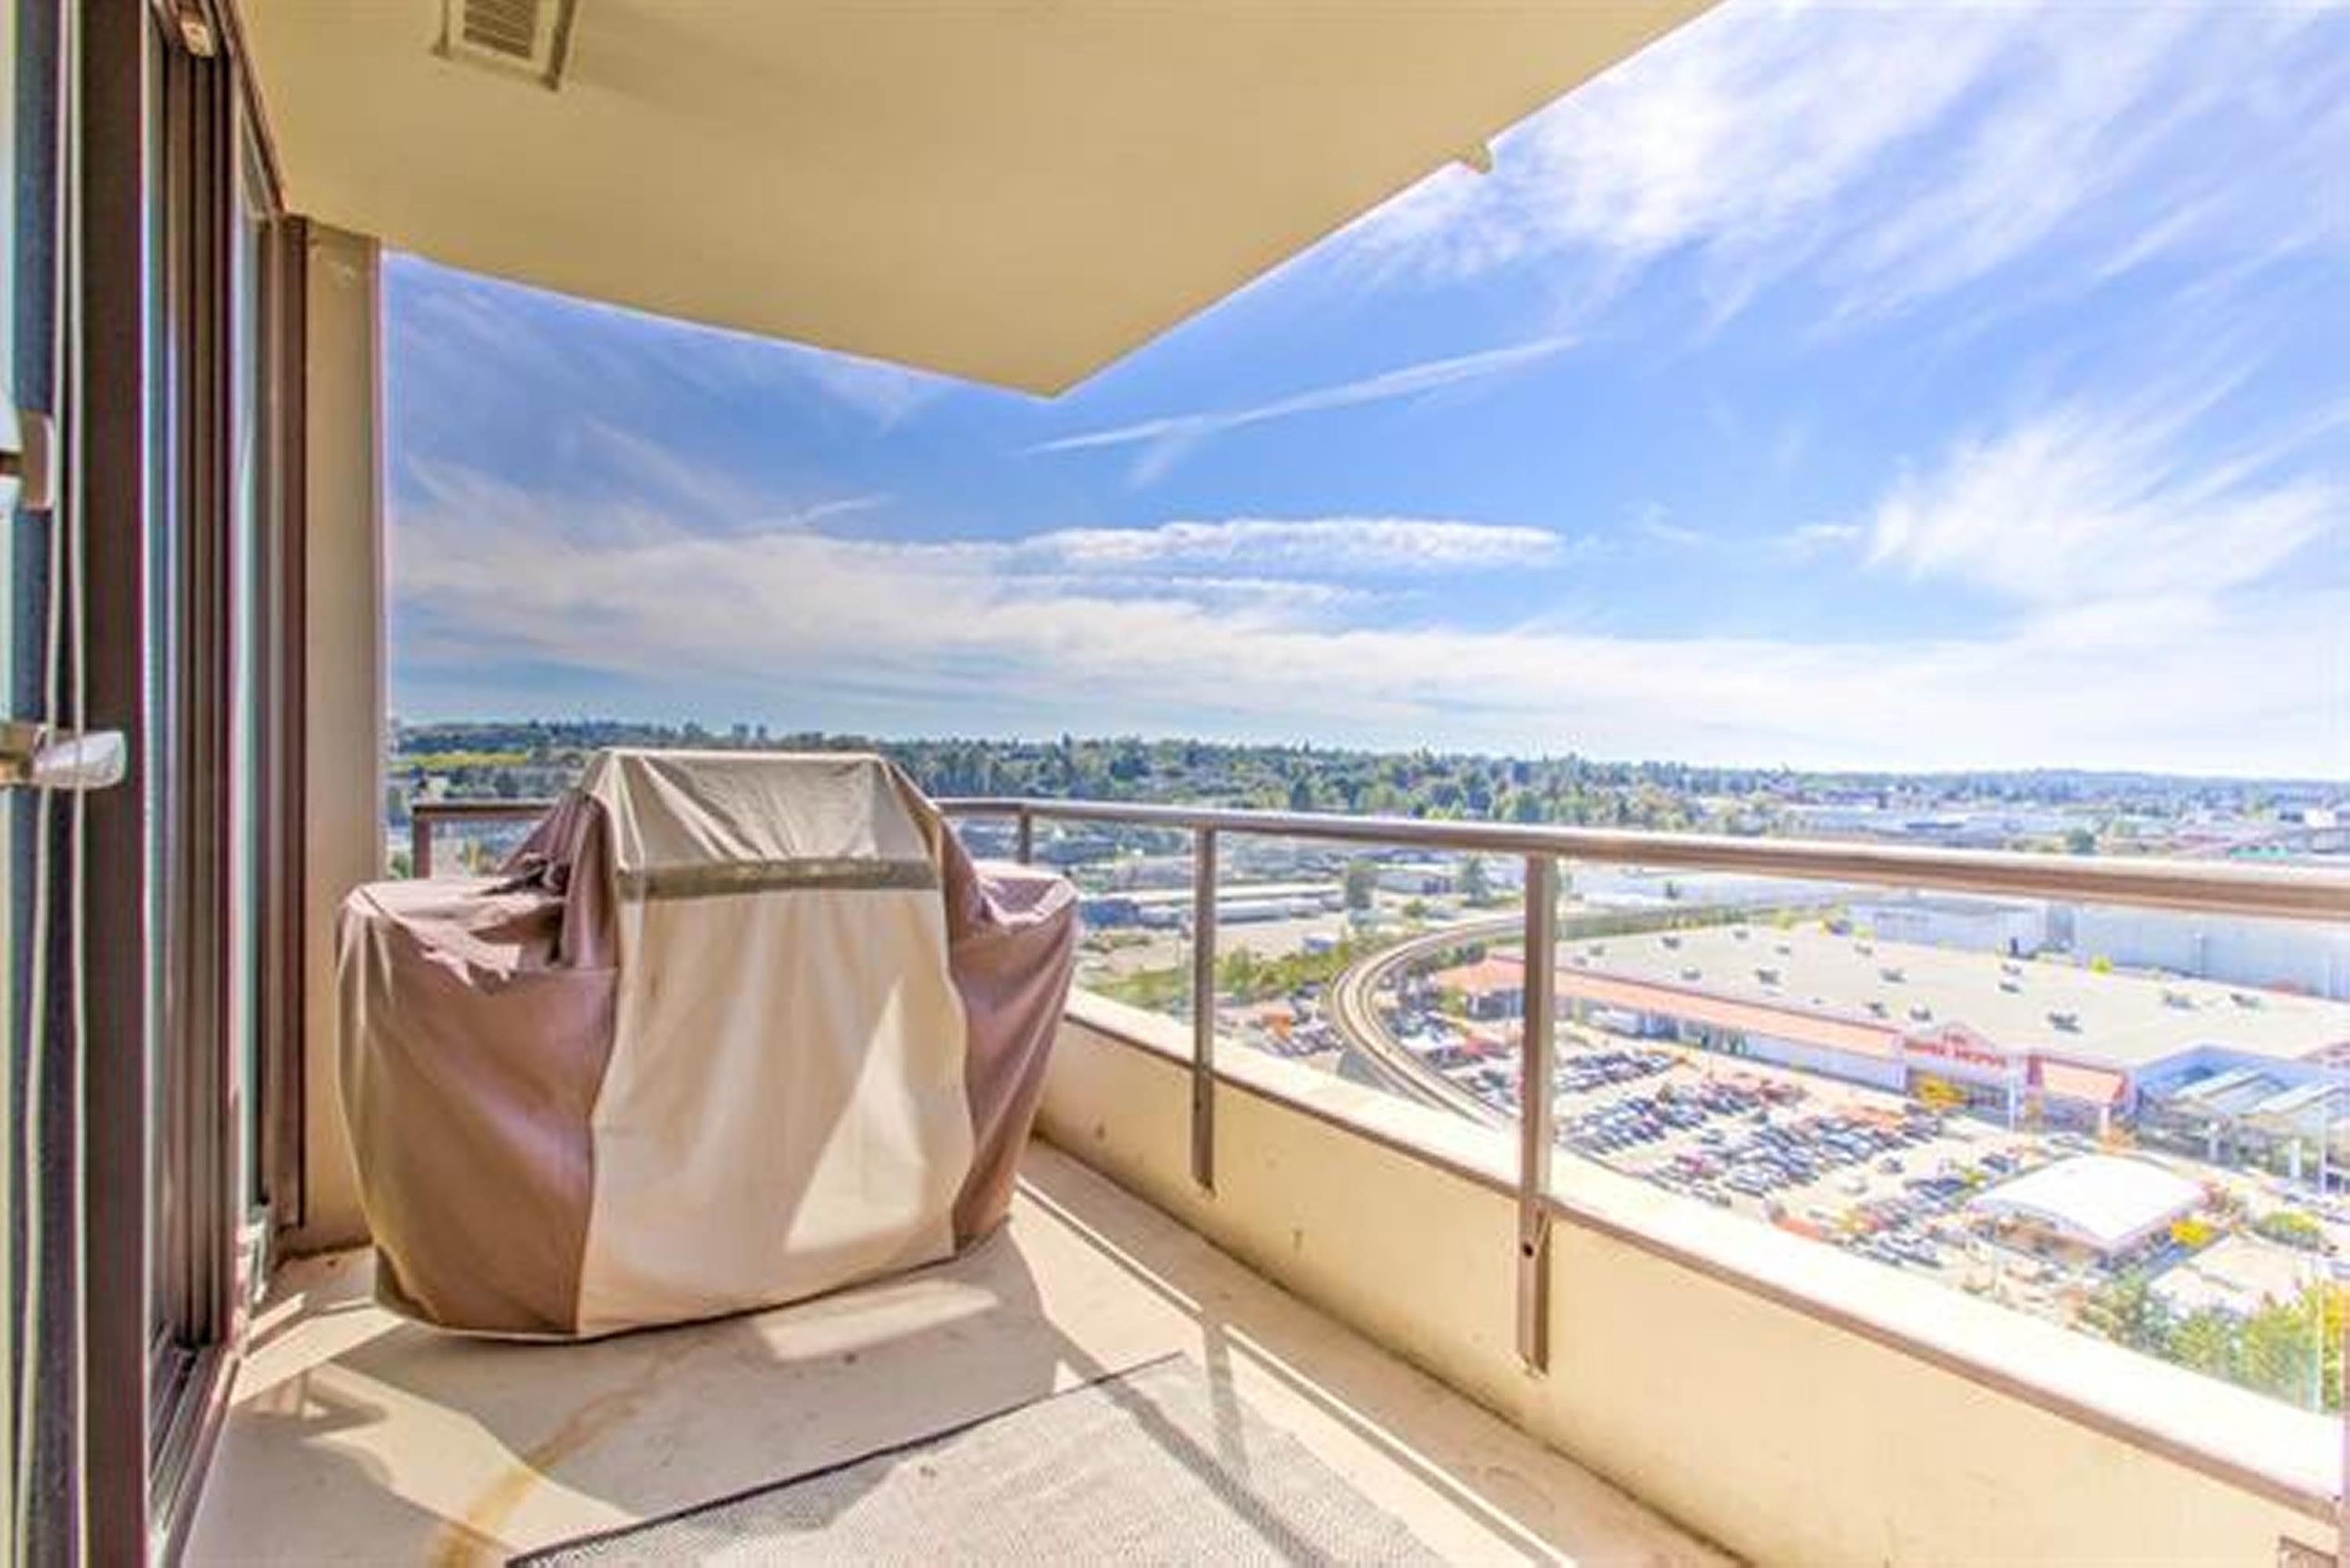 Enjoy unobstructed Sunsets every night from your large balcony